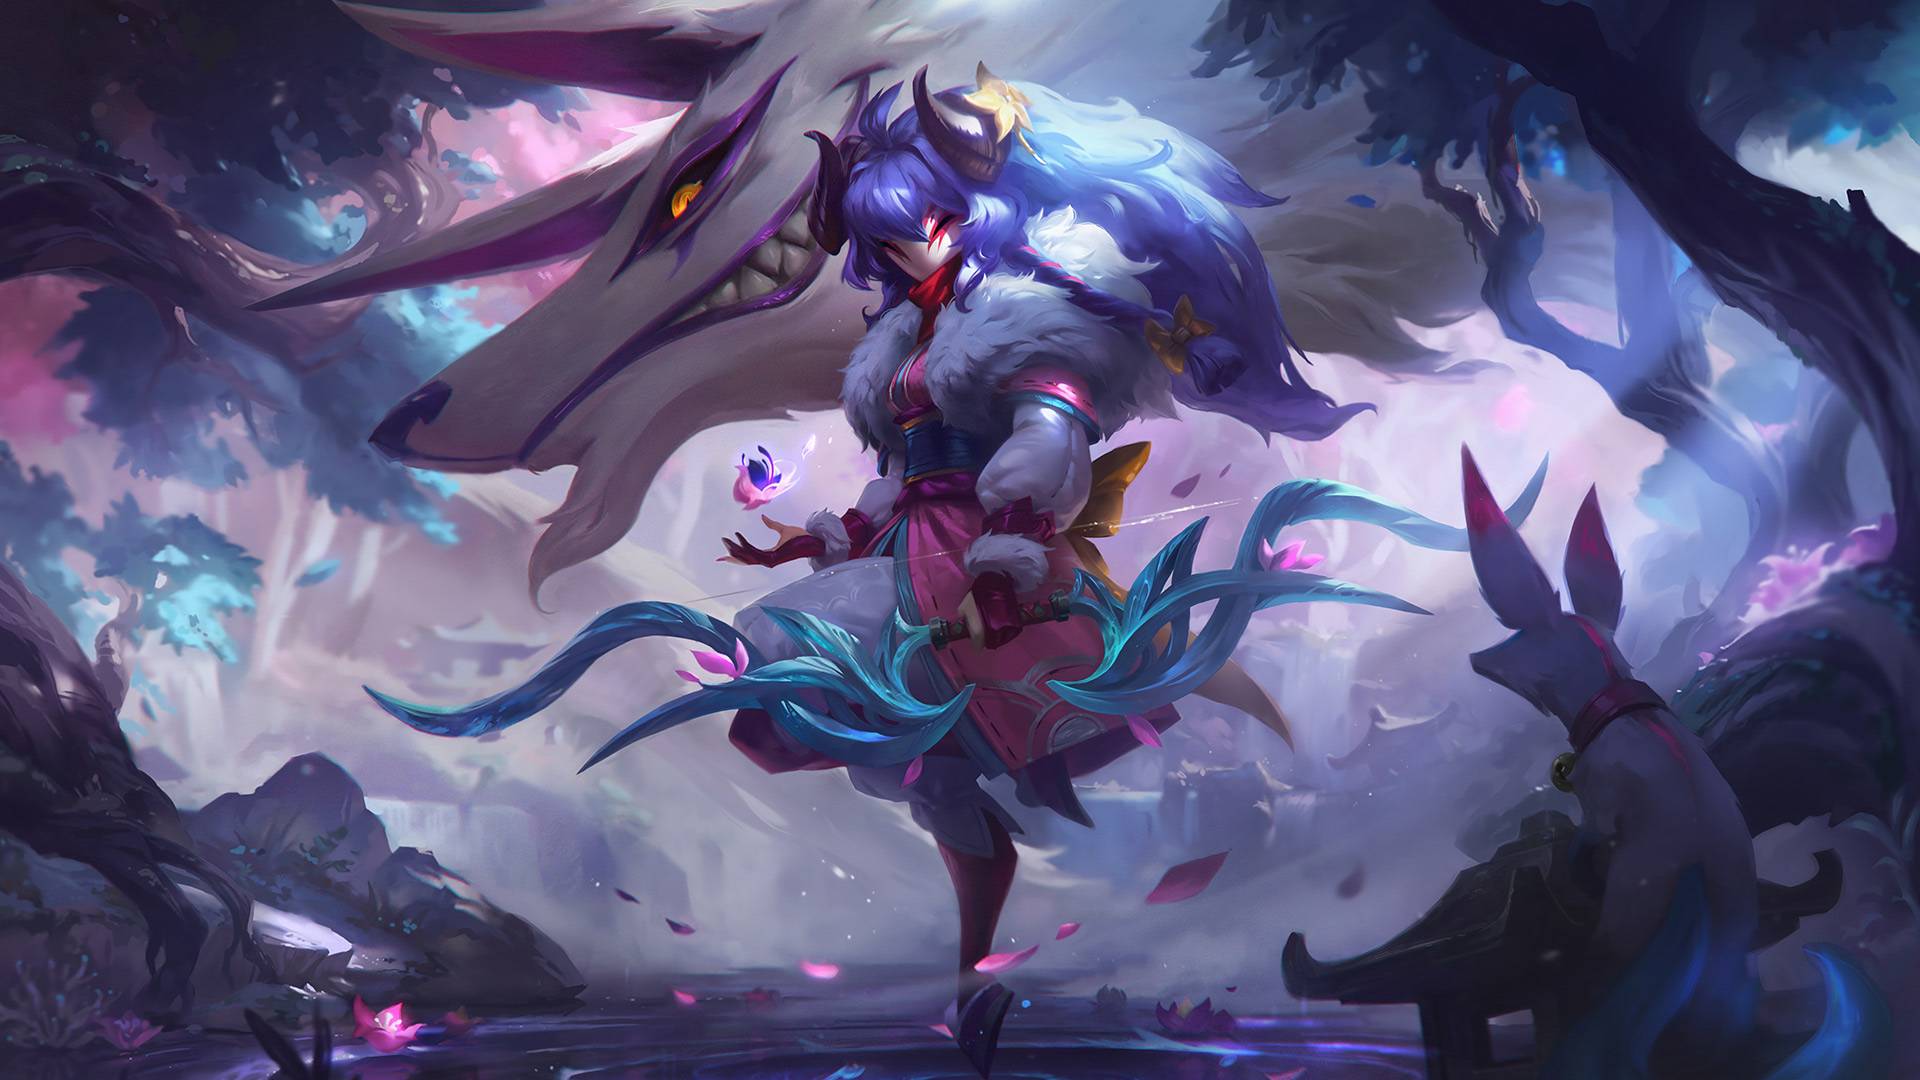 Get free League of Legends skins with Twitch Prime!